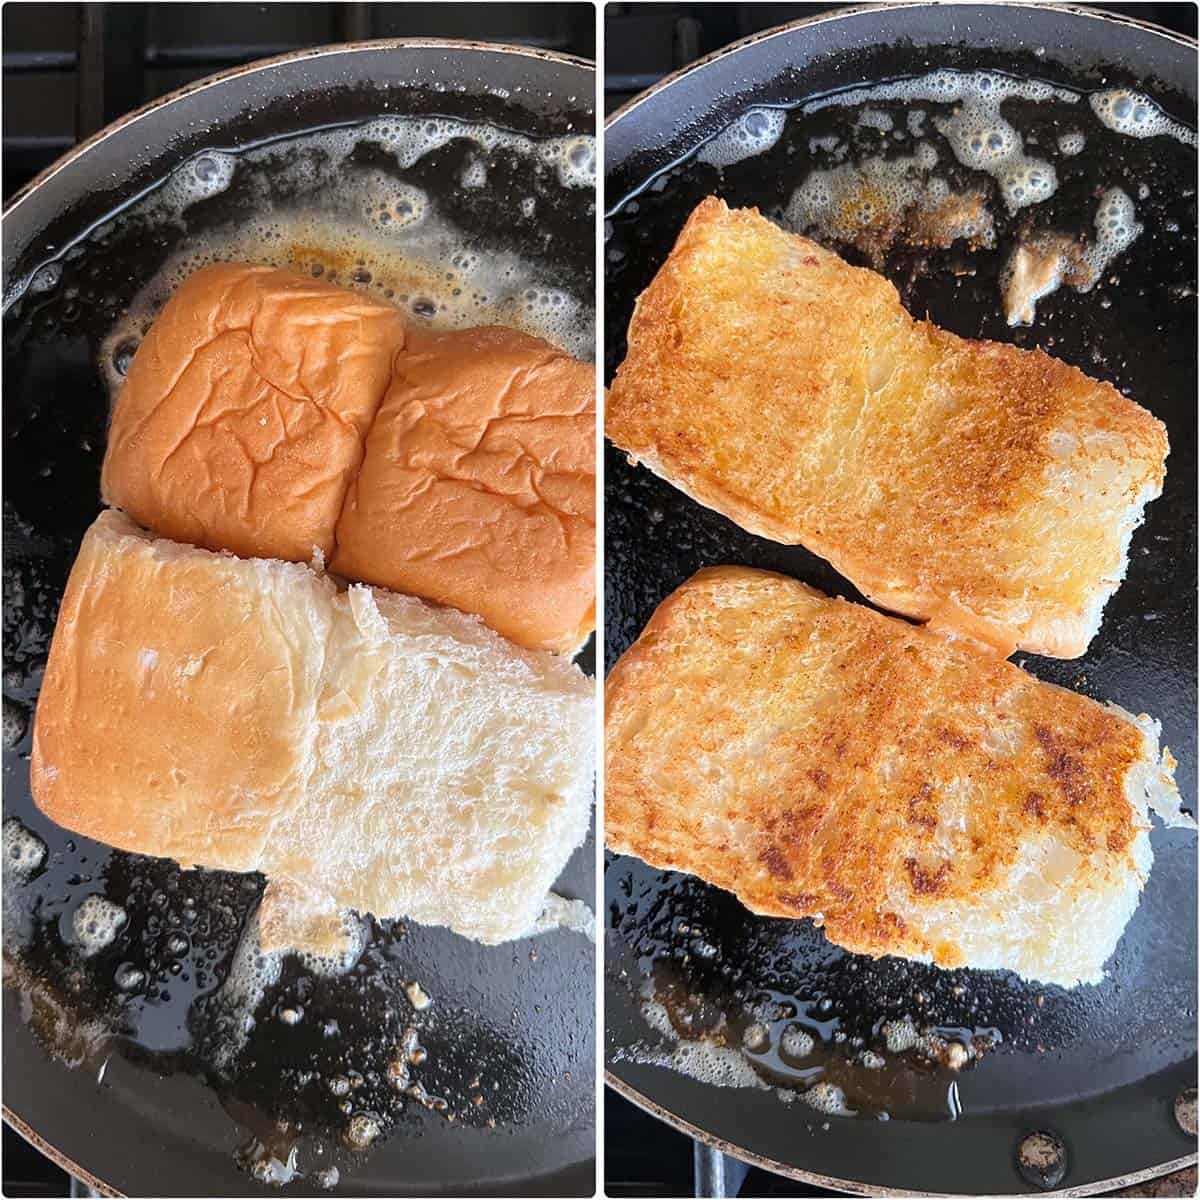 2 panel photo showing the toasting of buns on a pan.